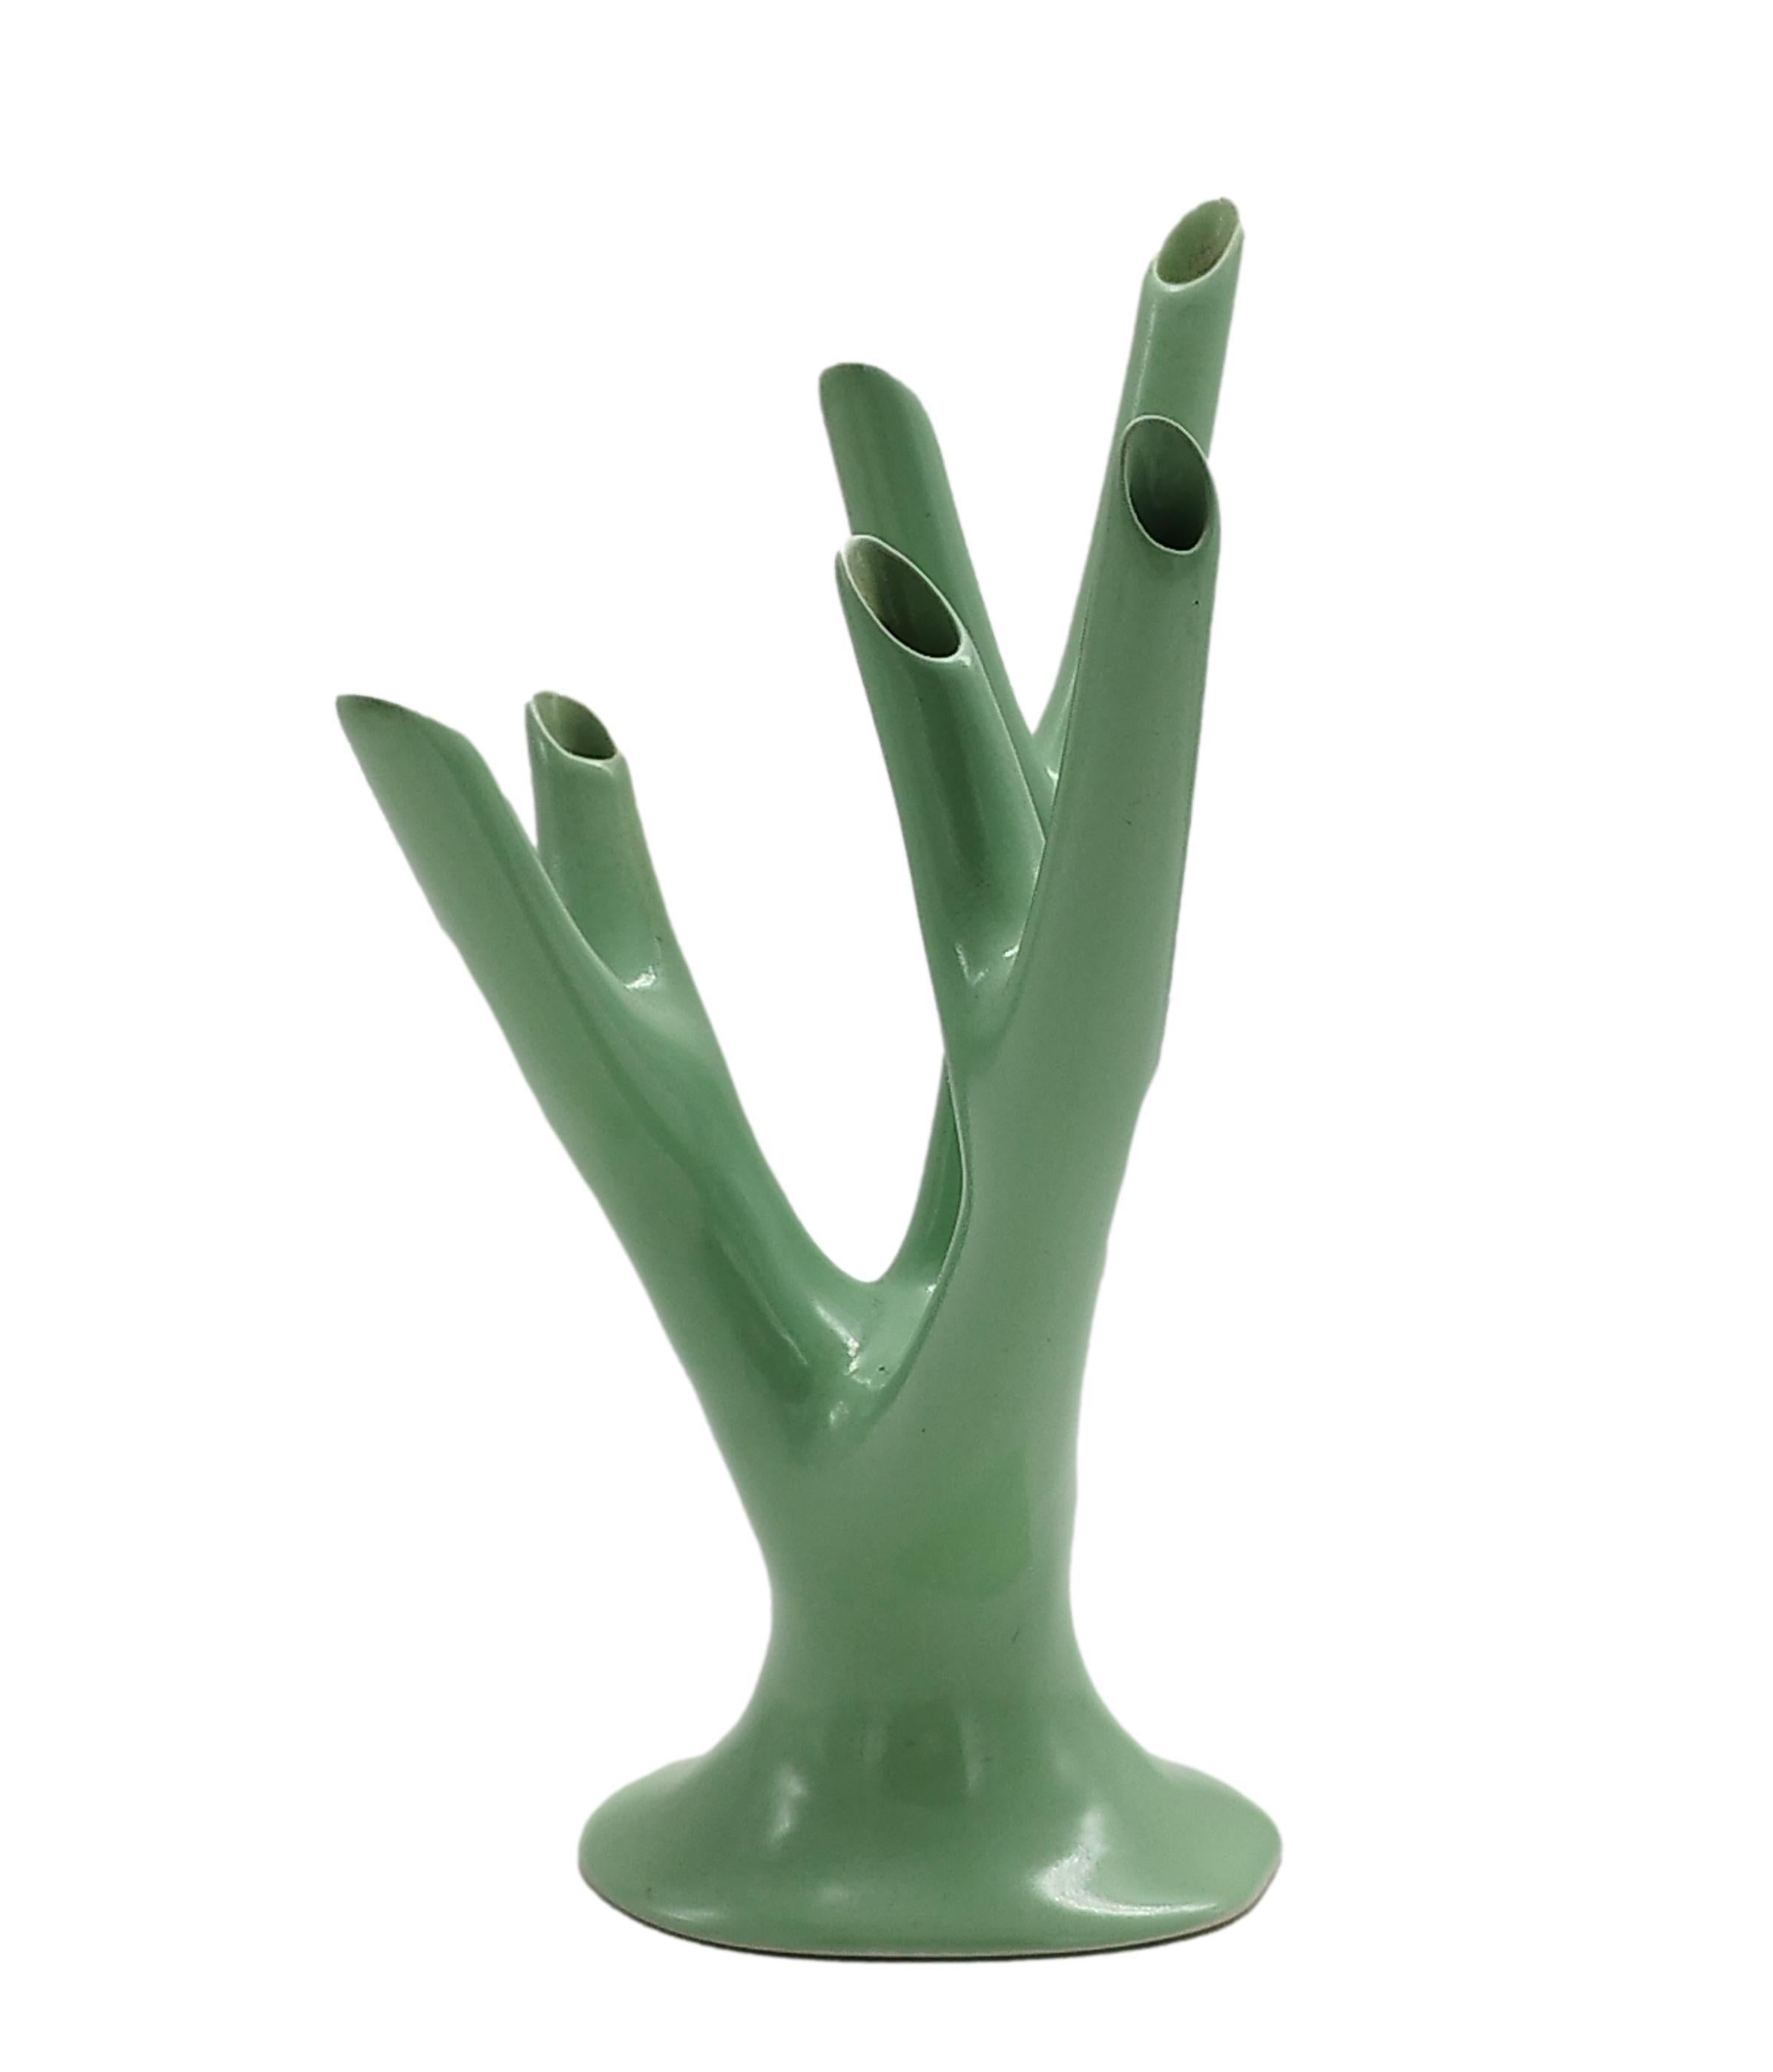 Vase/sculpture in the form of a 'branch' Design Guido Andlovitz for Lavenia. Strong earthenware, casting moulding, crystallised enamel. Marked 